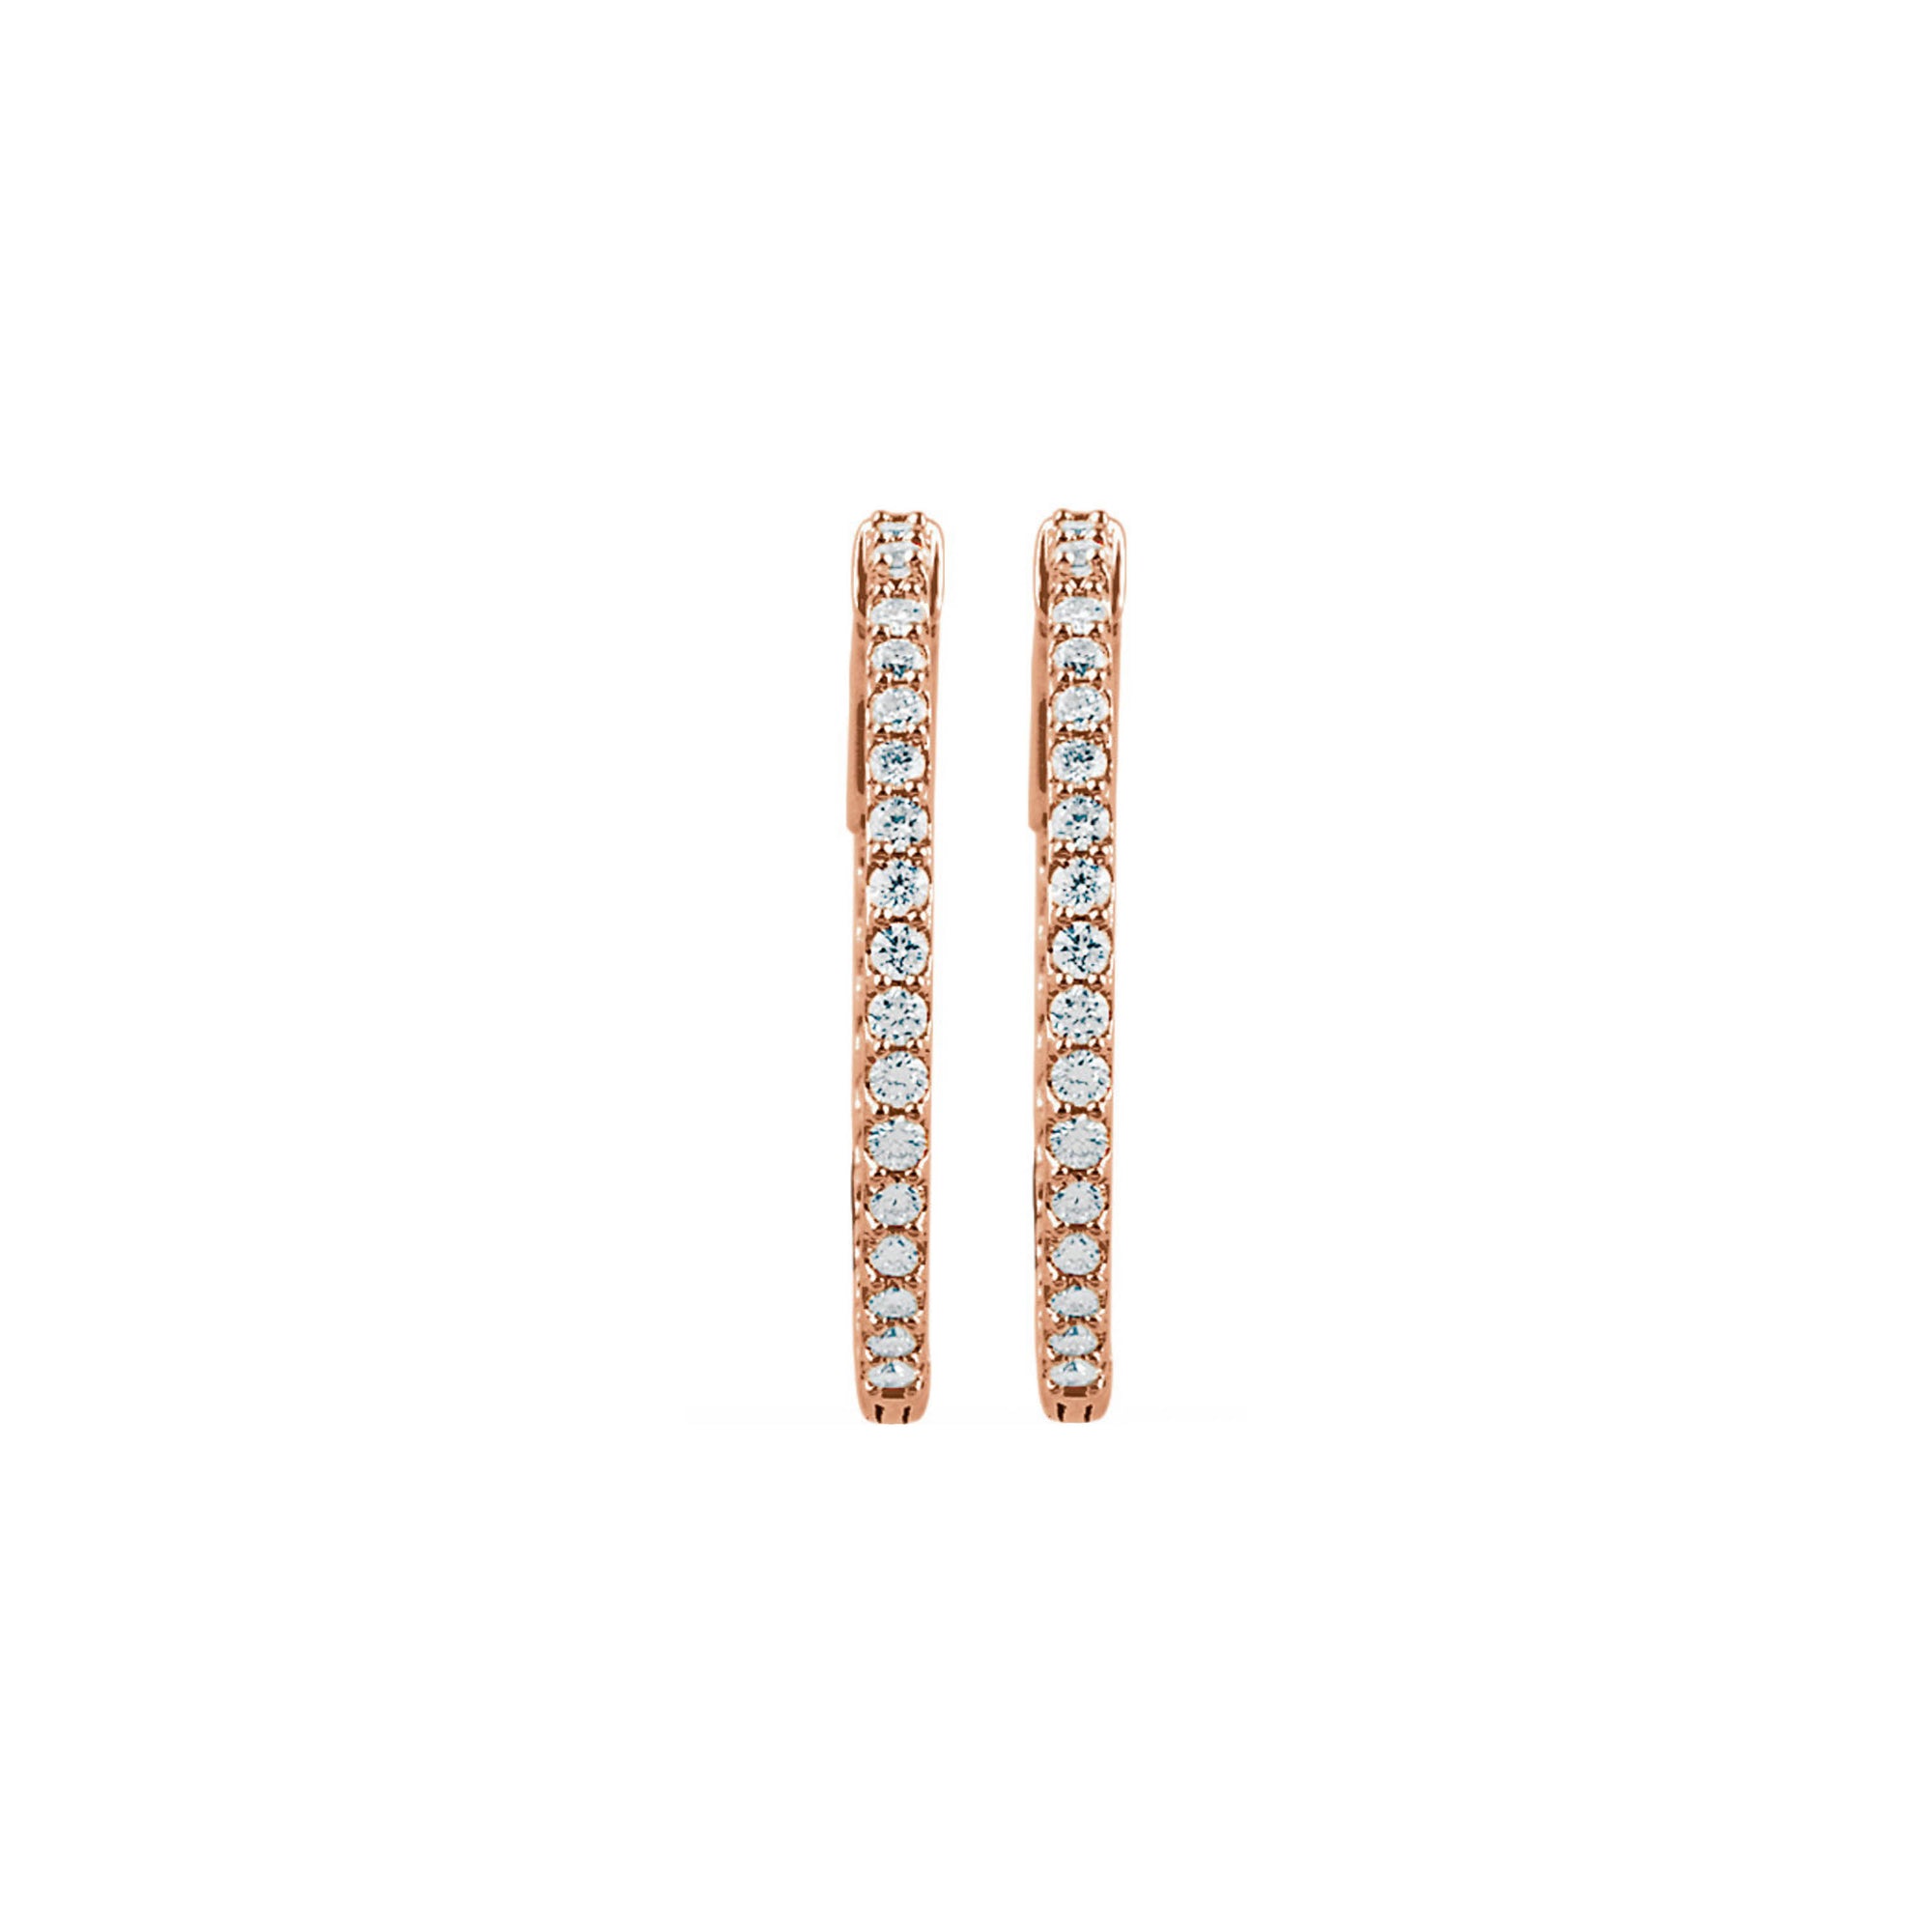 Diamond Earring Hoops, 2.00 Carat Total Weight in 14k White, Yellow or Rose Gold - Talisman Collection Fine Jewelers